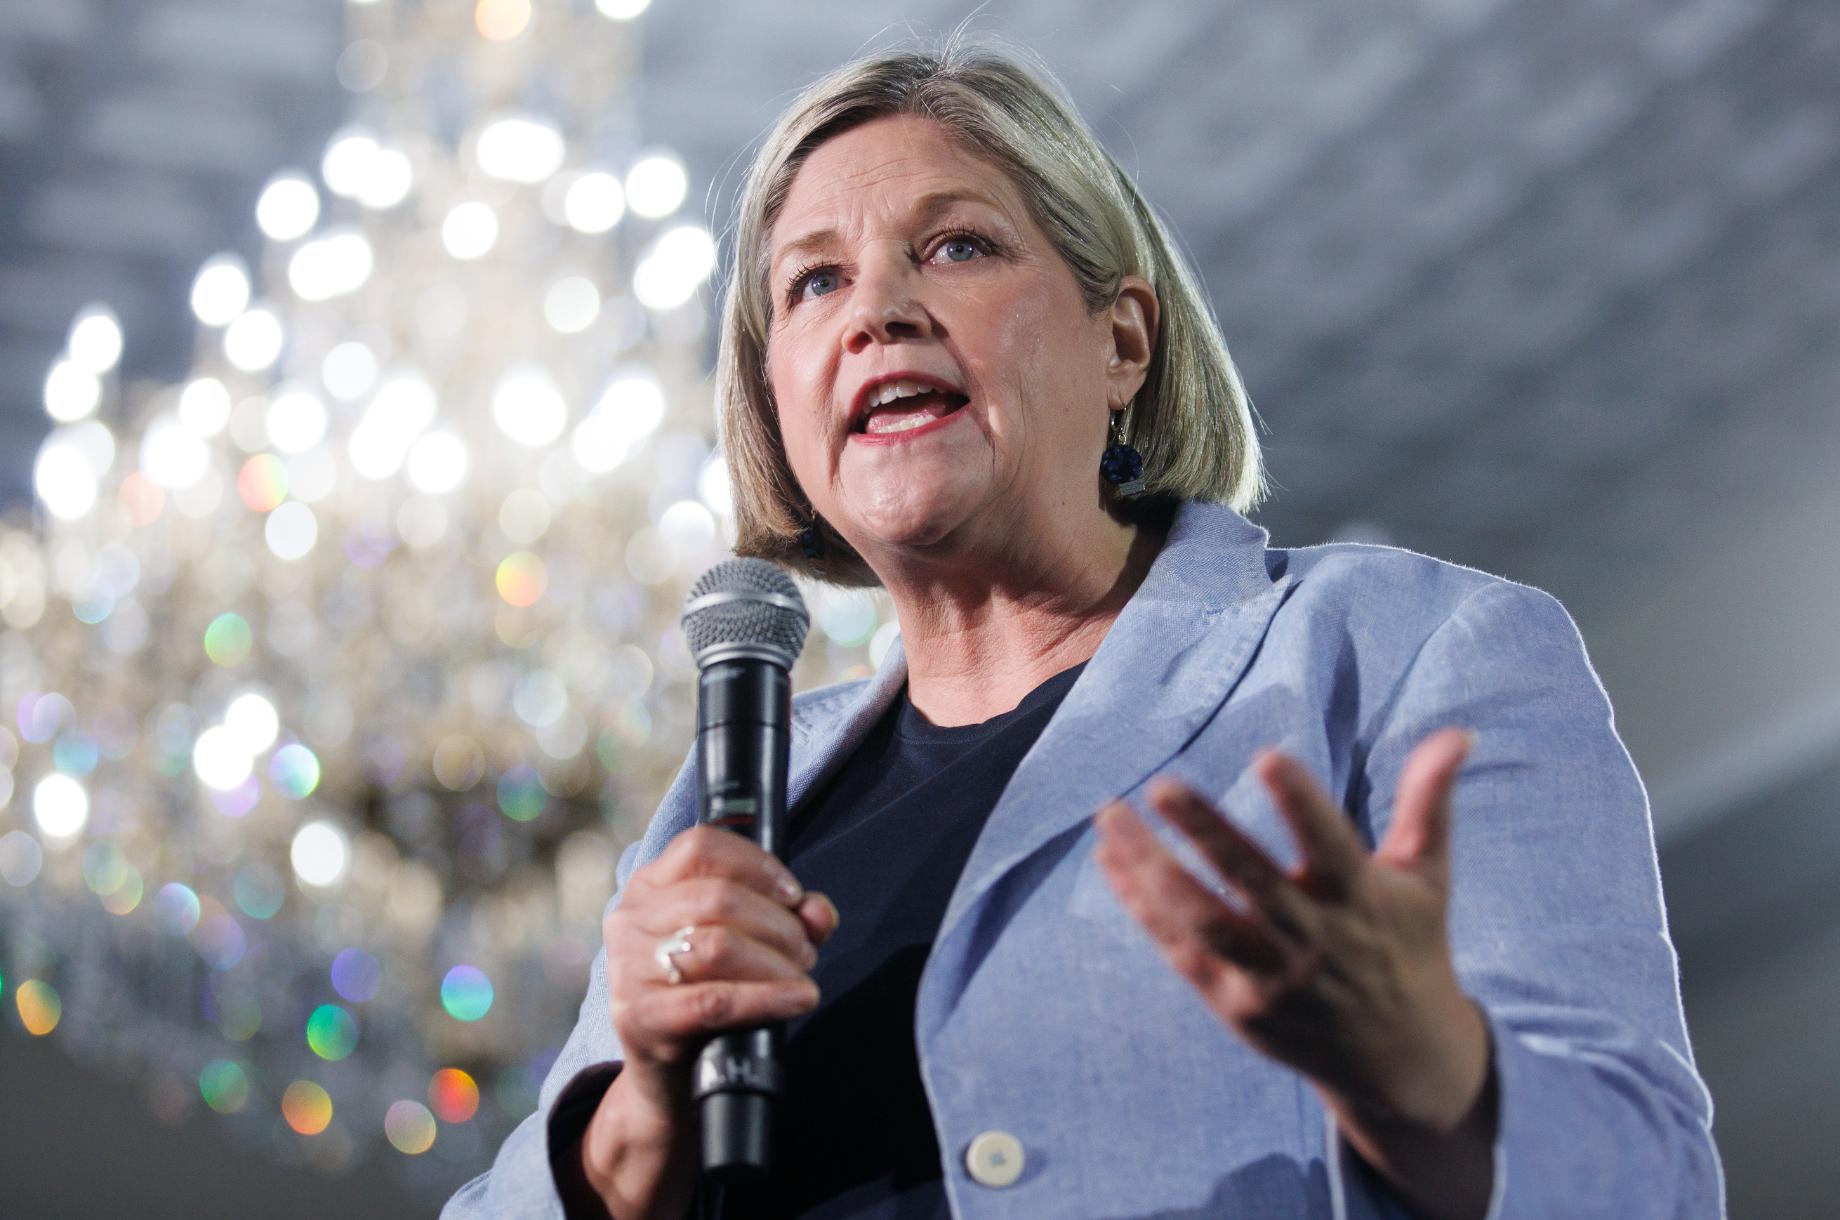 Ontario NDP Leader Andrea Horwath speaks during an NDP campaign rally in Brampton, Ont., Saturday. May 14, 2022. THE CANADIAN PRESS/Cole Burston